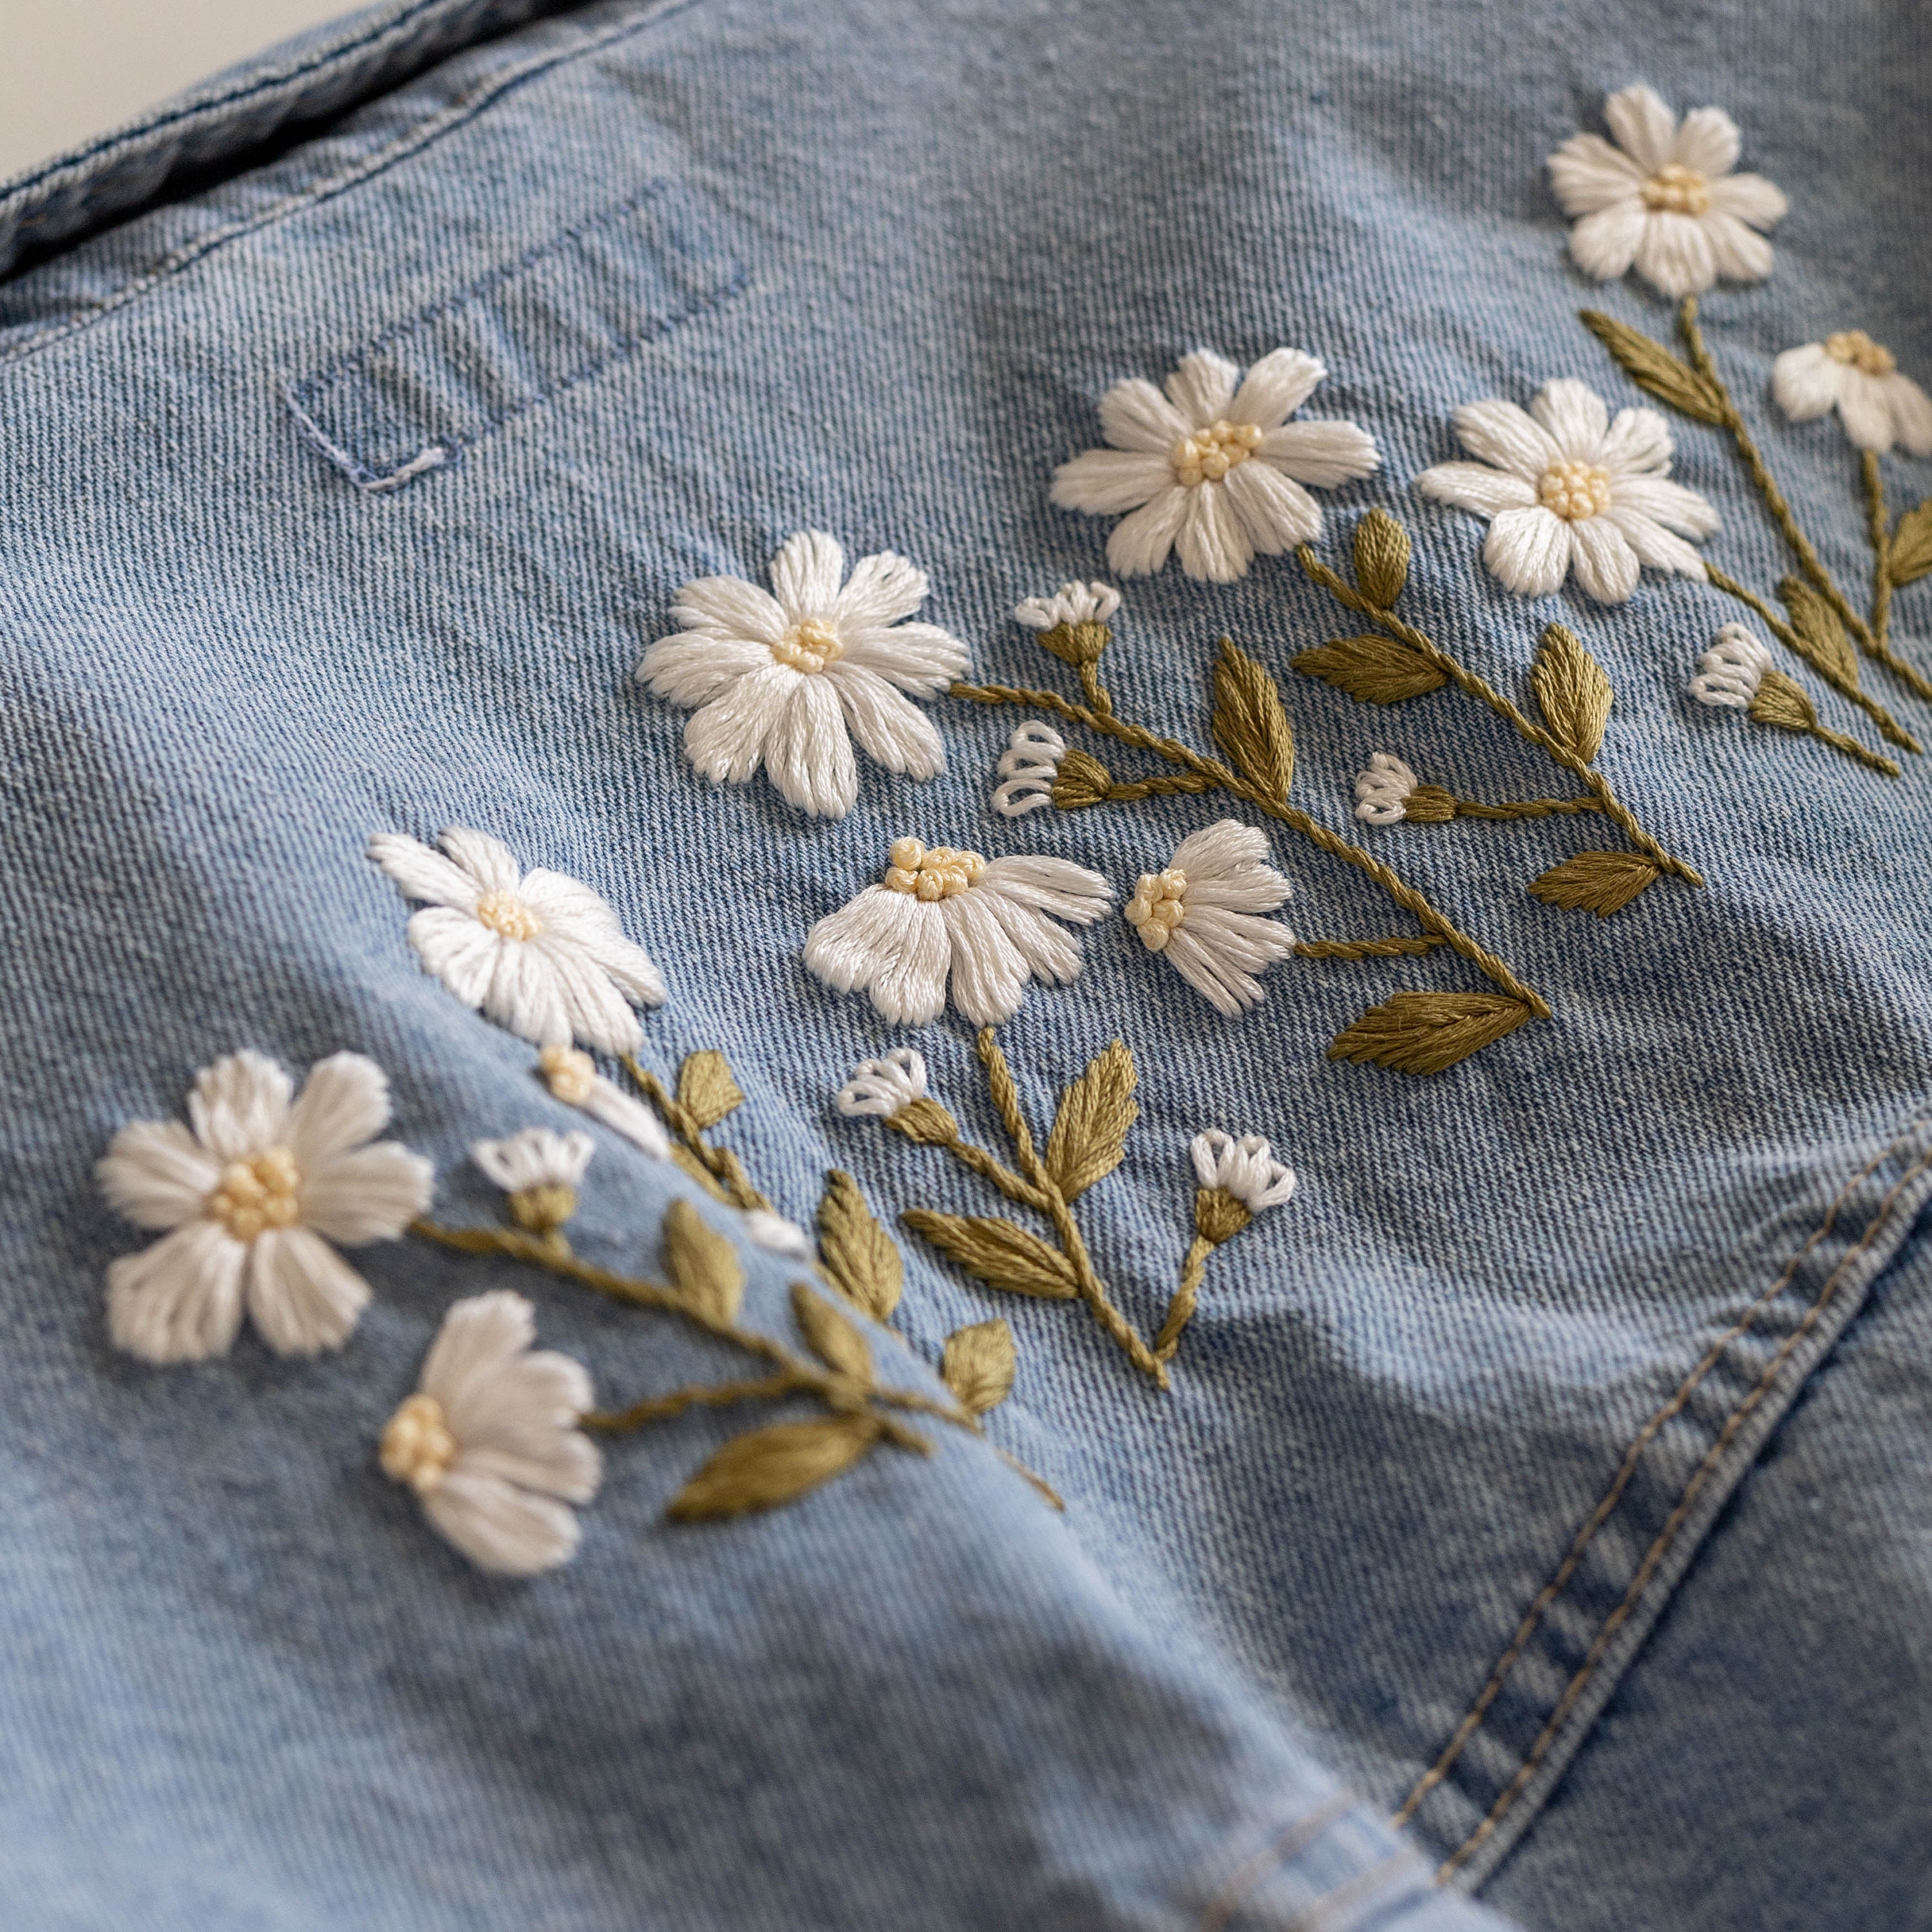 Floral Embroidery Pattern Beginner Embroidery PDF Pattern - Etsy UK